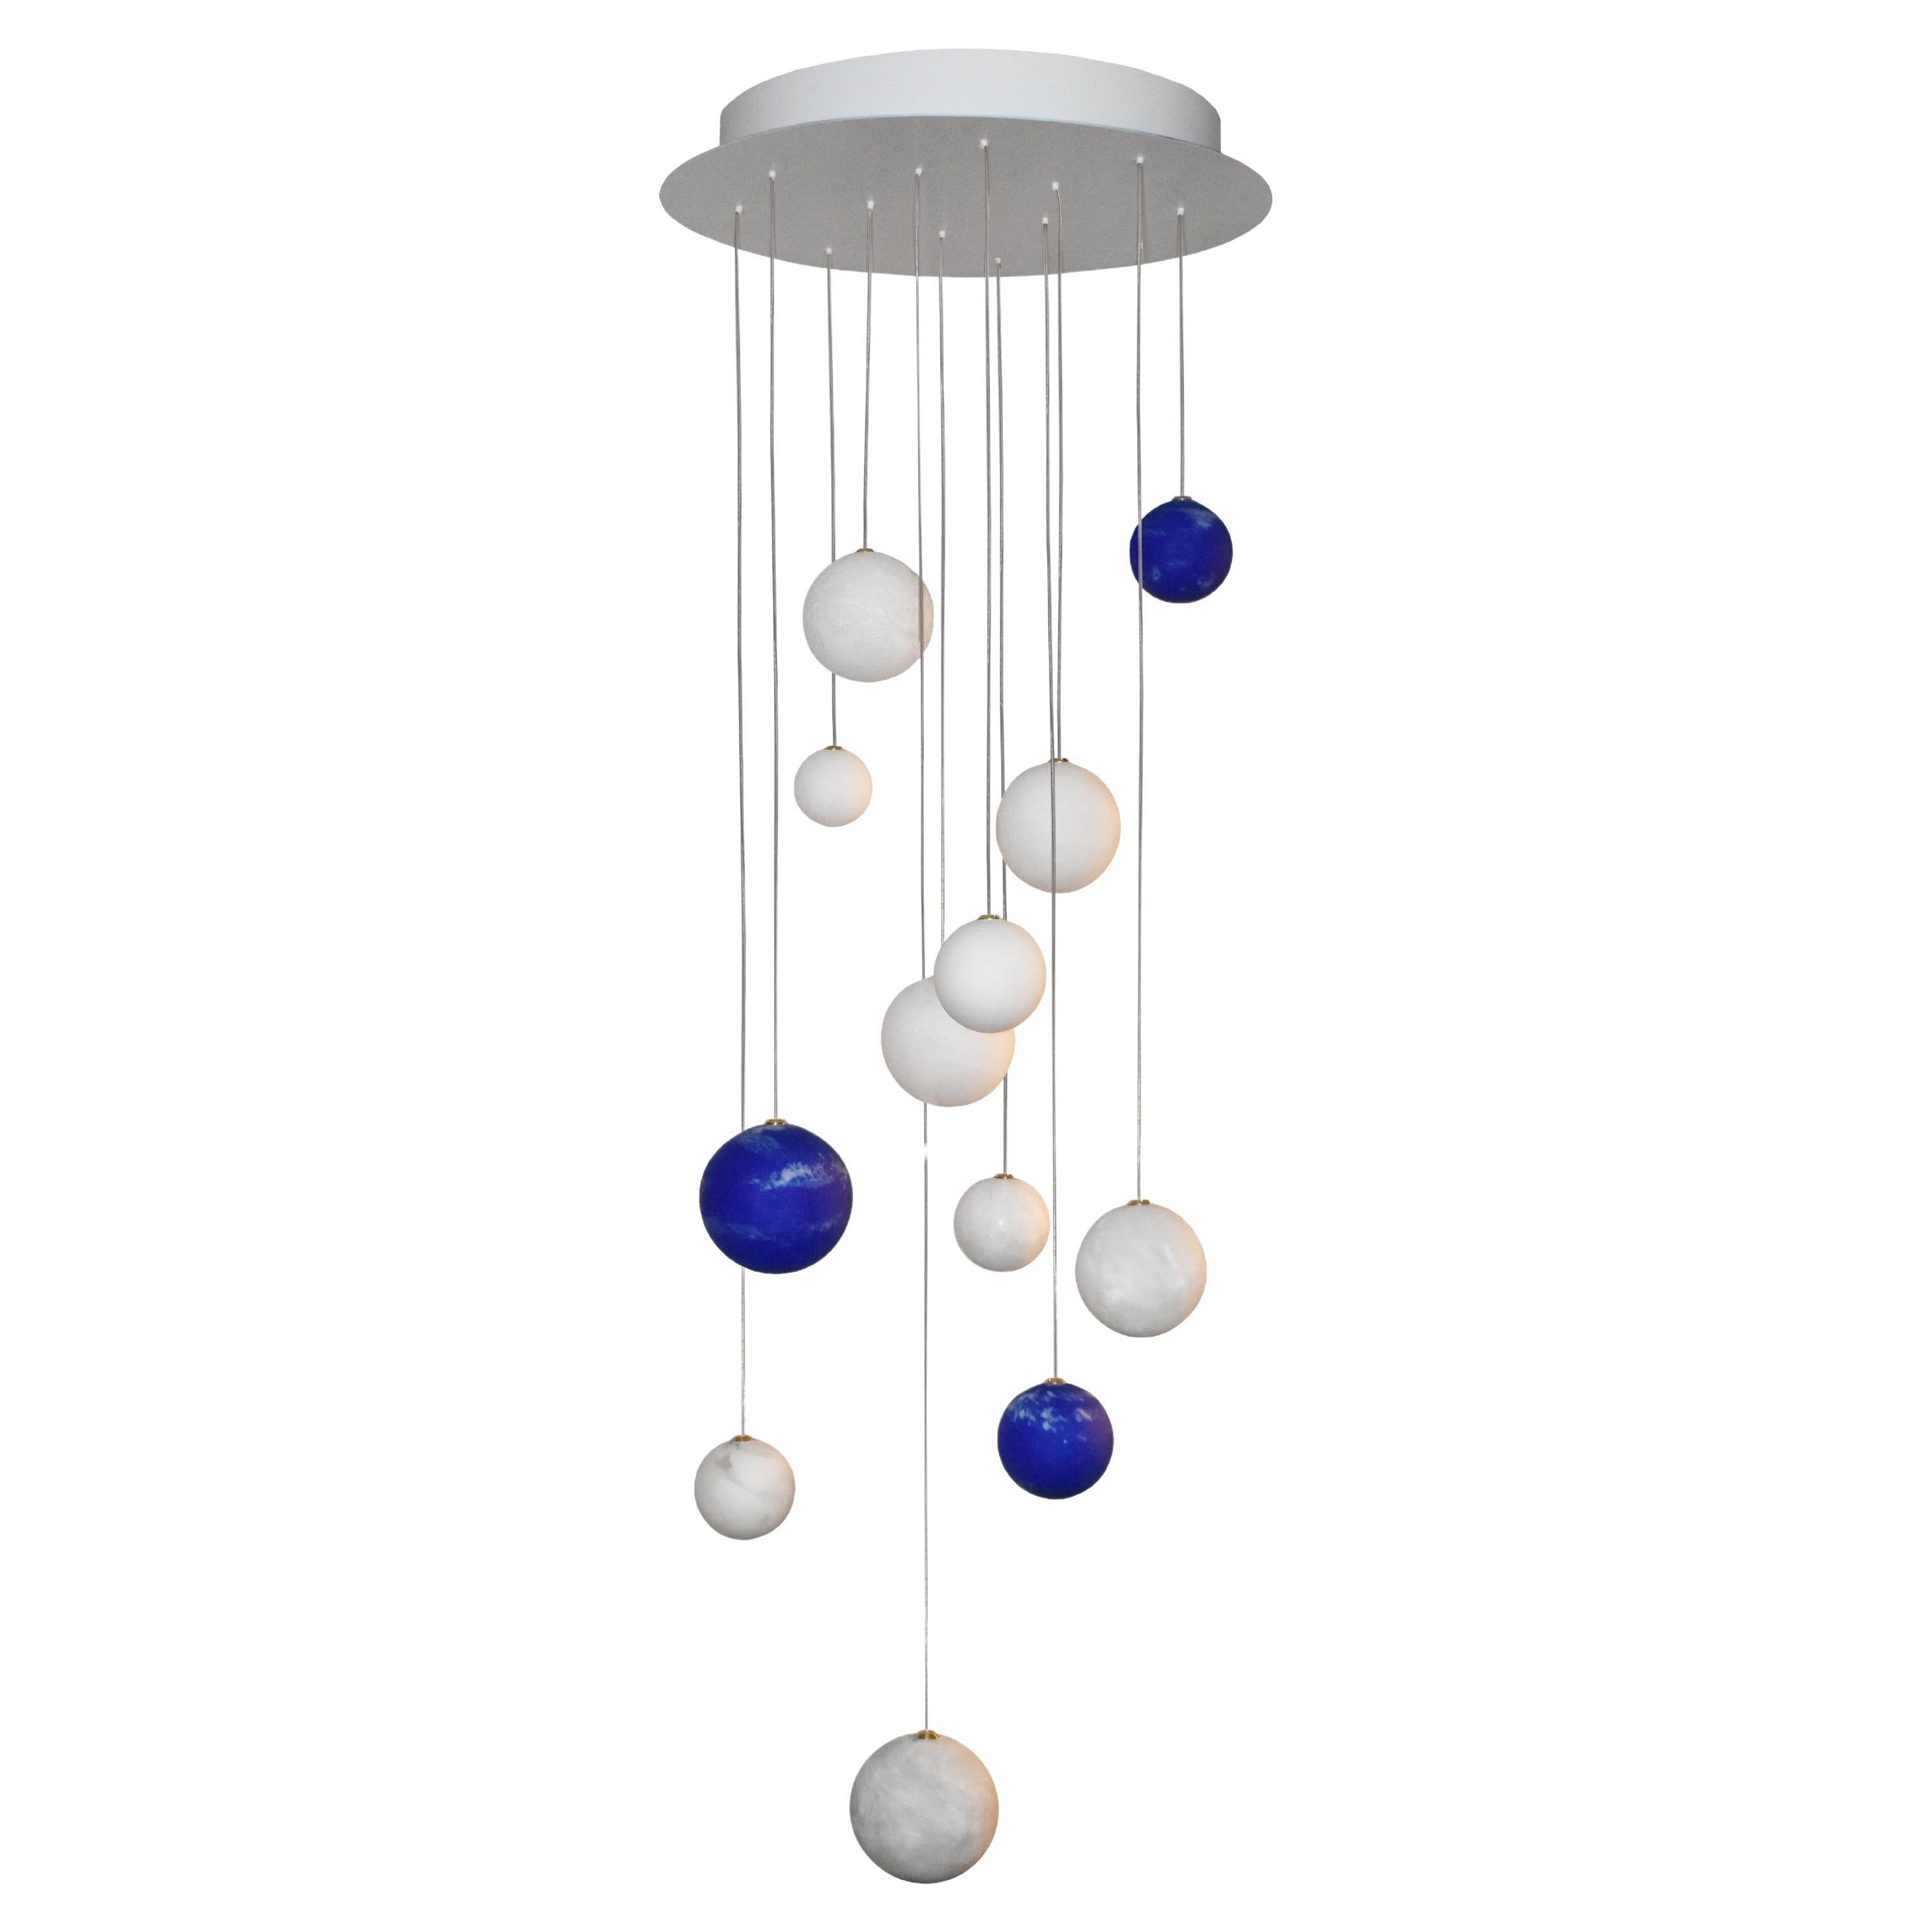 12 Planets And Ciels Chandelier by Ludovic Clément D’armont